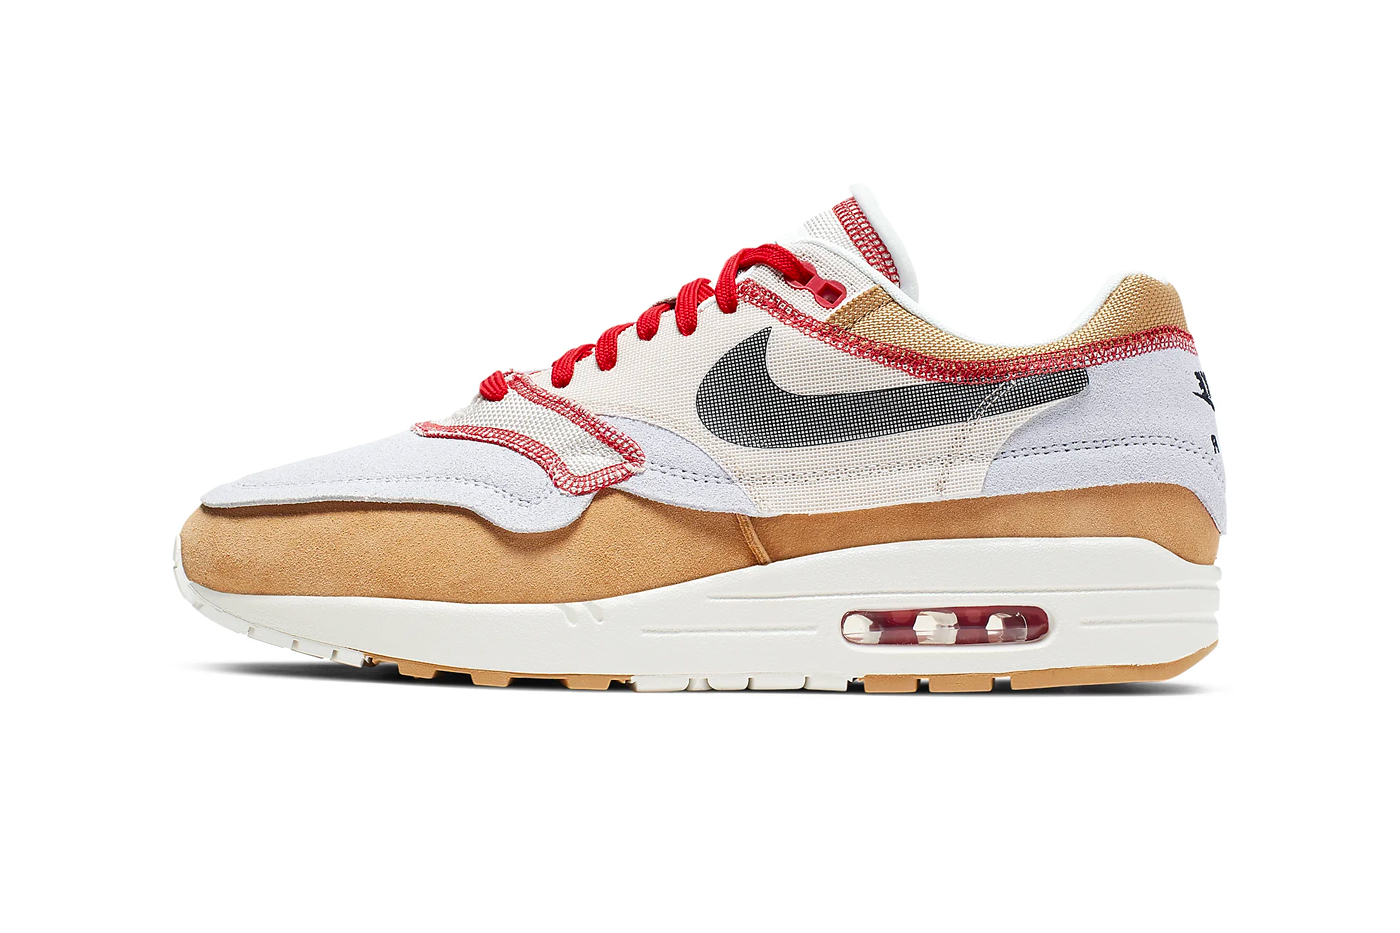 Nike Air Max 1 Premium SE Inside Out Release Info | HYPEBEAST